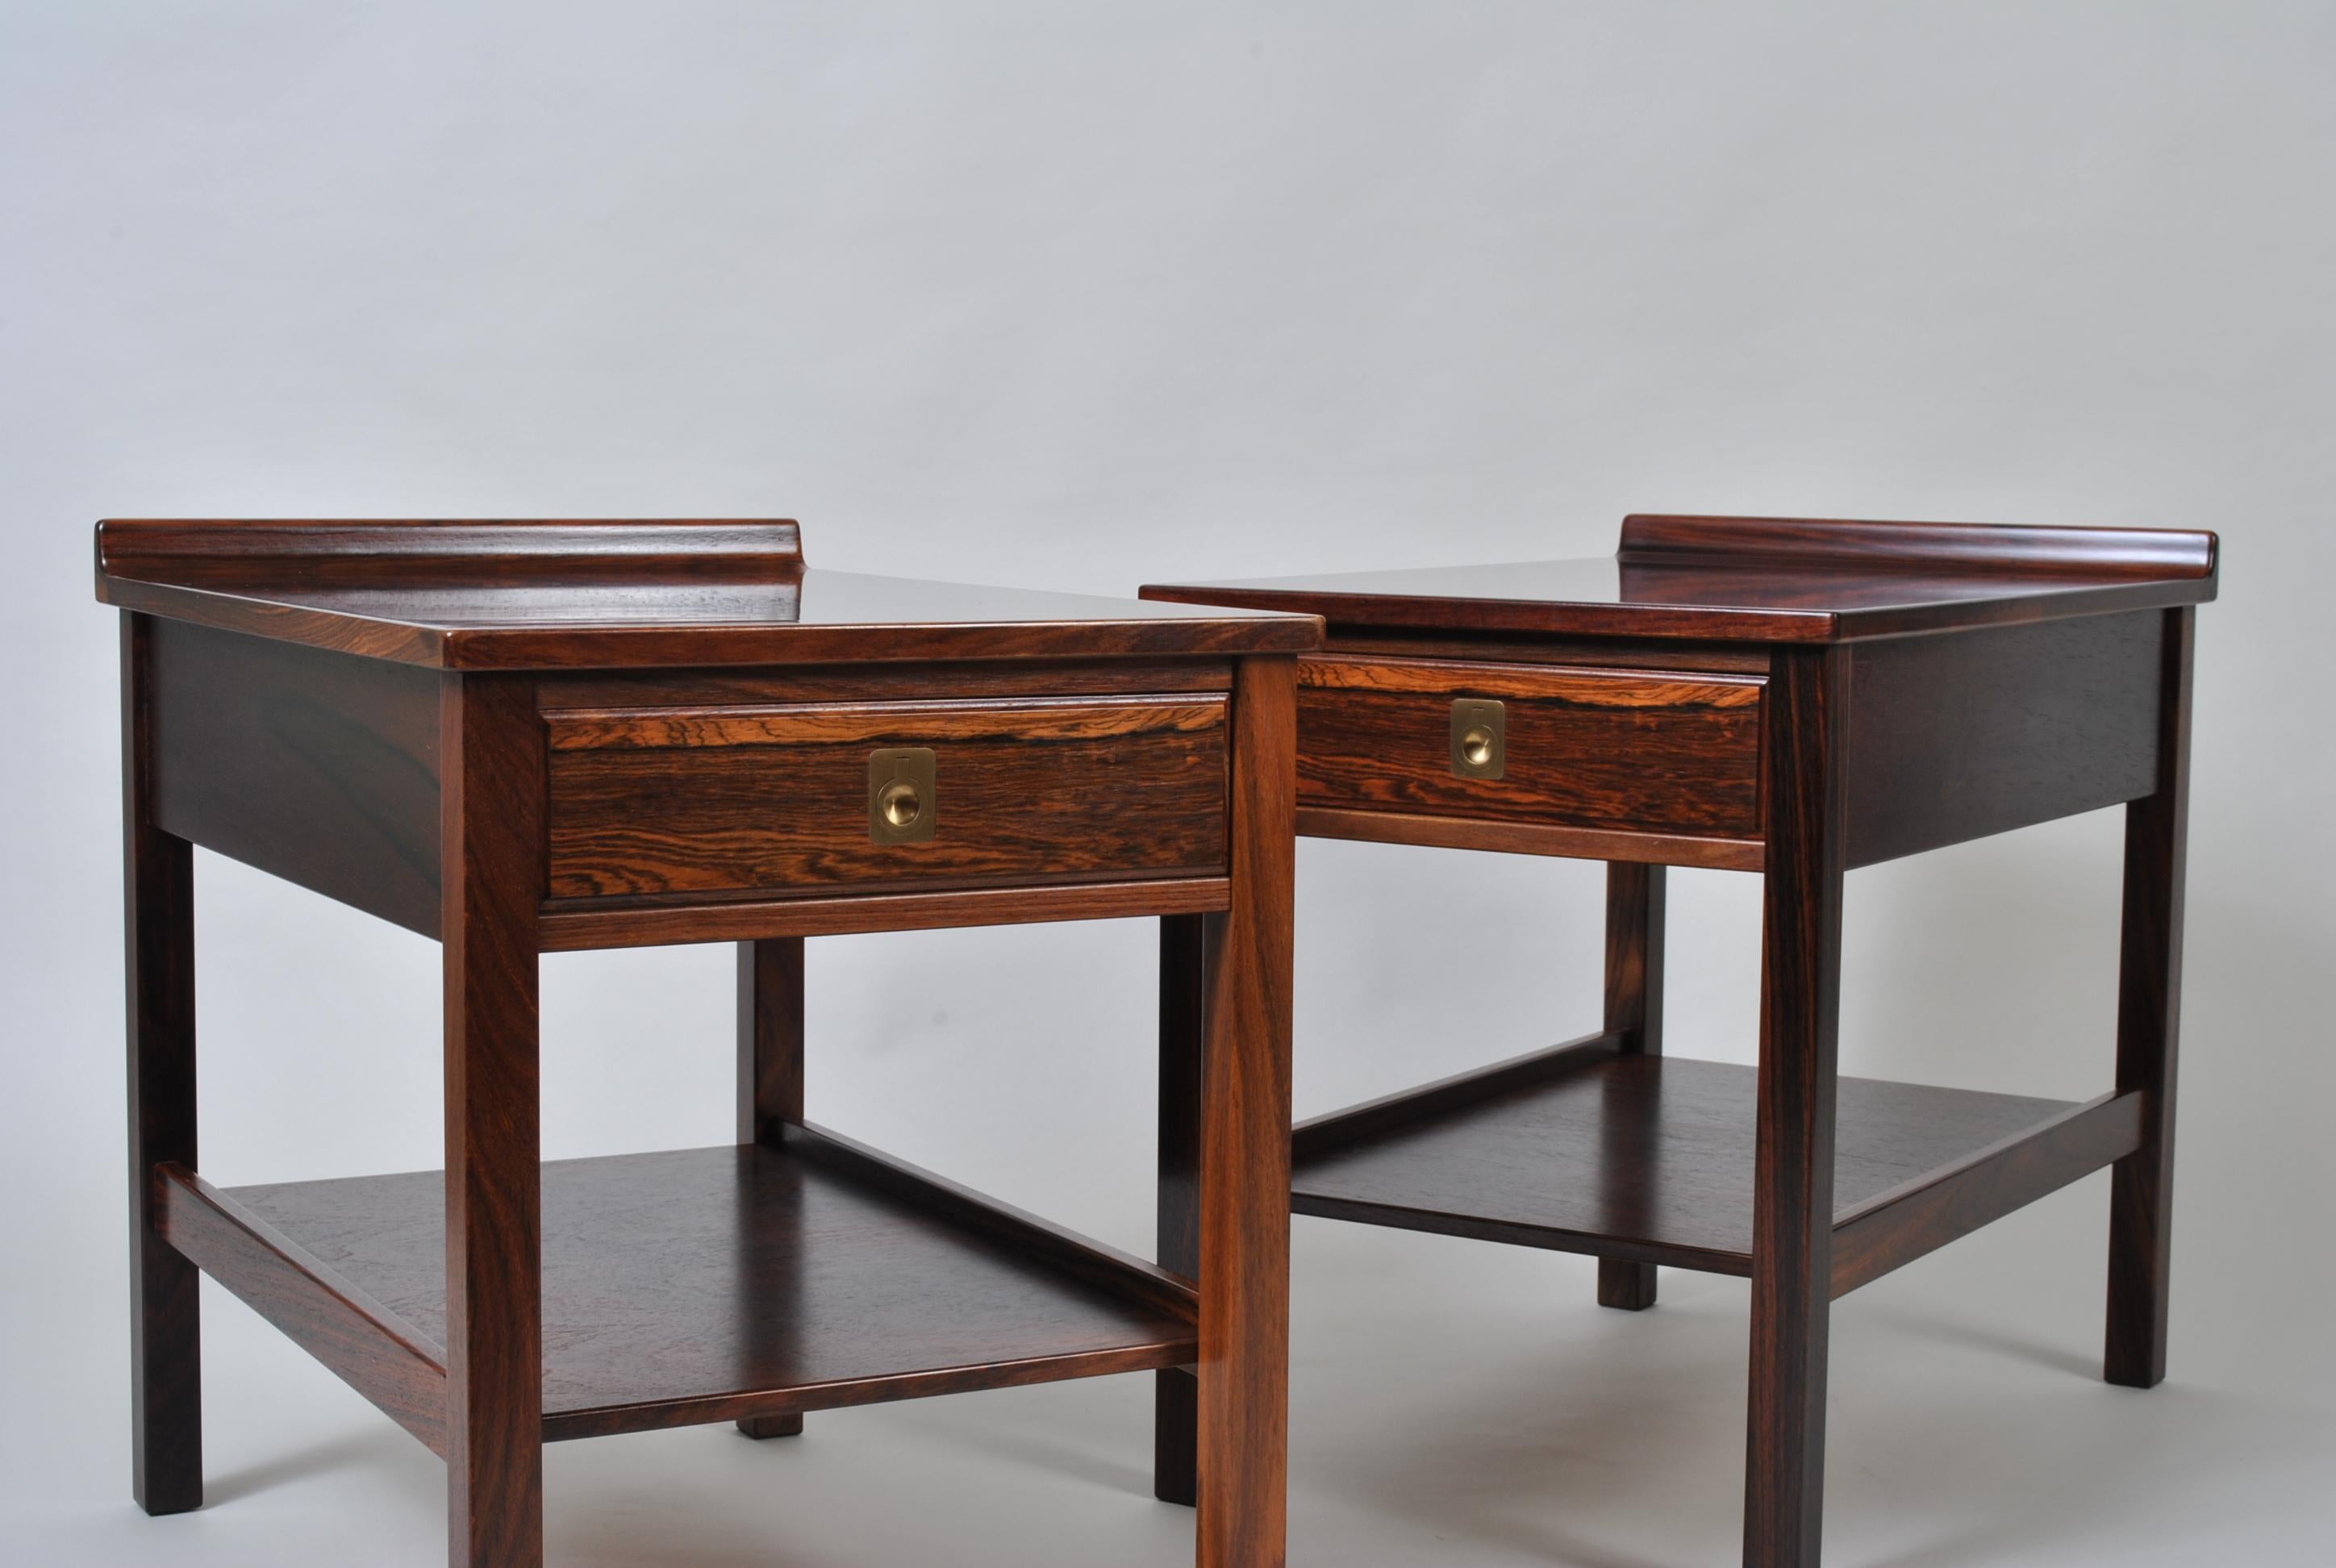 A very rare pair of rosewood nightstands or end tables by Torbjorn Afdal. Designed at Afdal’s Bruksbo design studios and produced by Mellemstrands, Norway, circa 1960. Extremely well crafted and highly practical. Classic Nordic midcentury design.